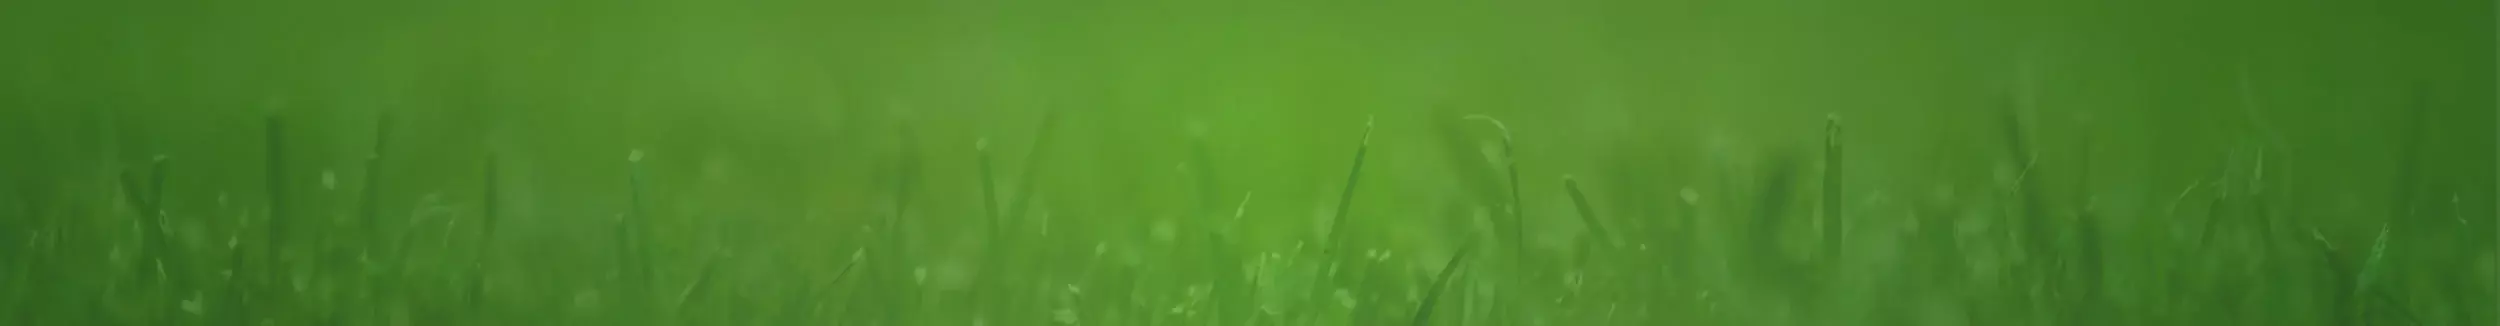 Blades of grass with green background.